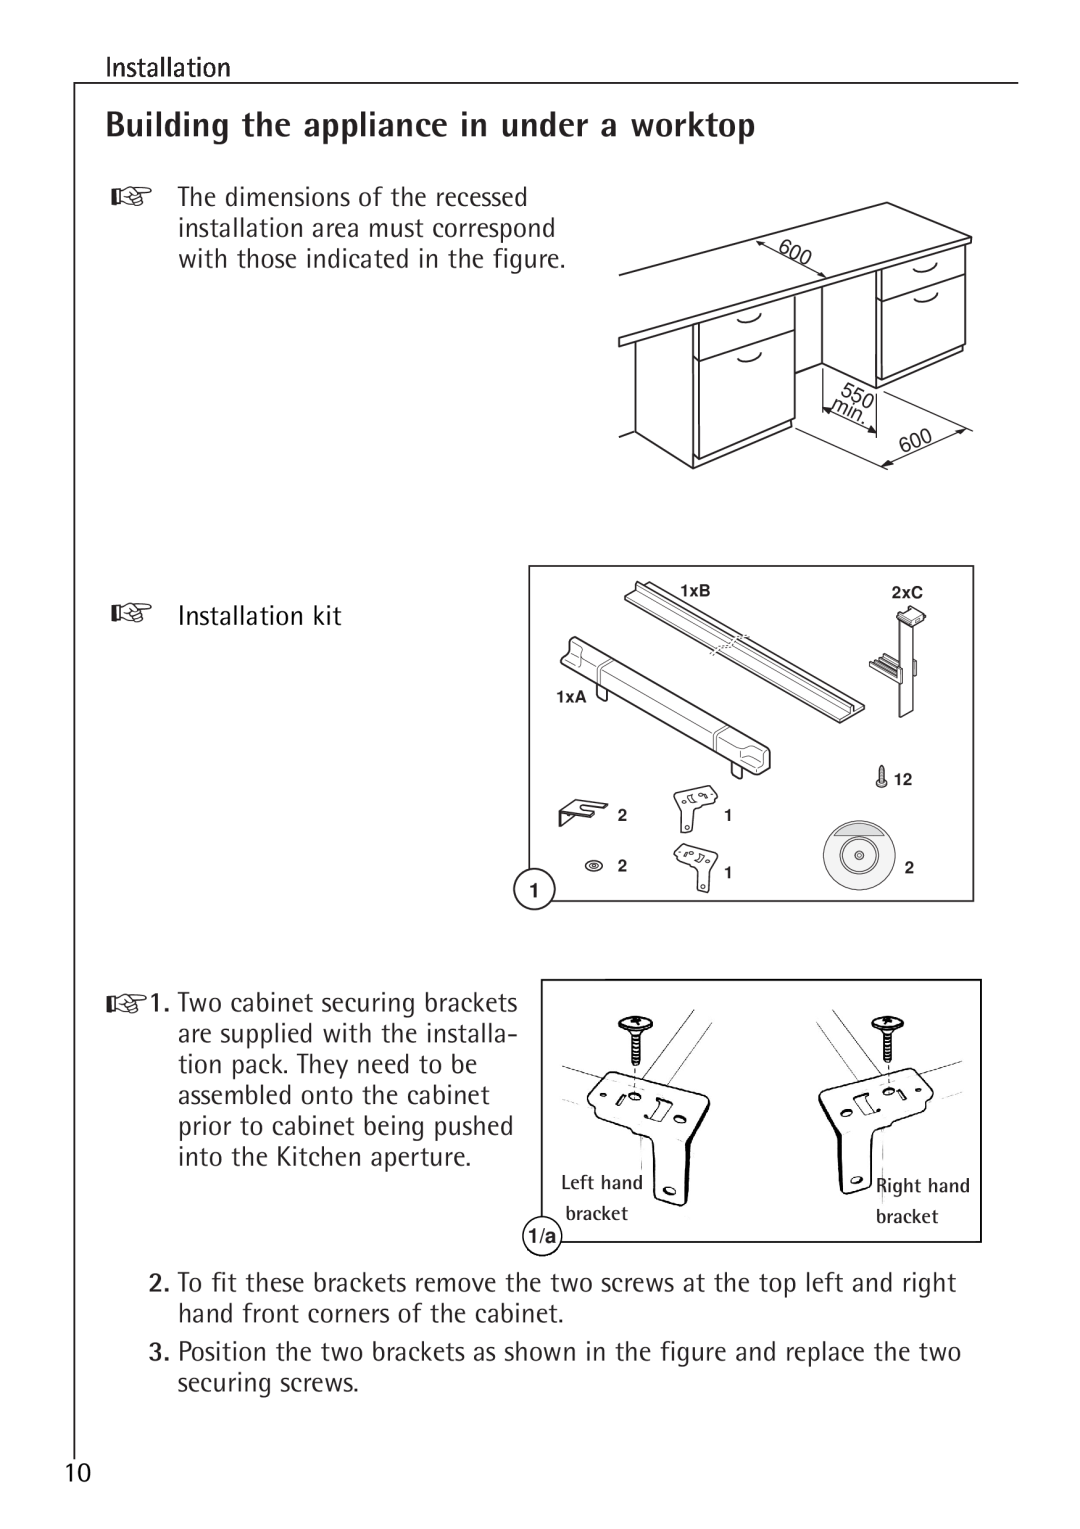 Electrolux SANTO U 86040 i installation instructions Building the appliance in under a worktop, 550 min 